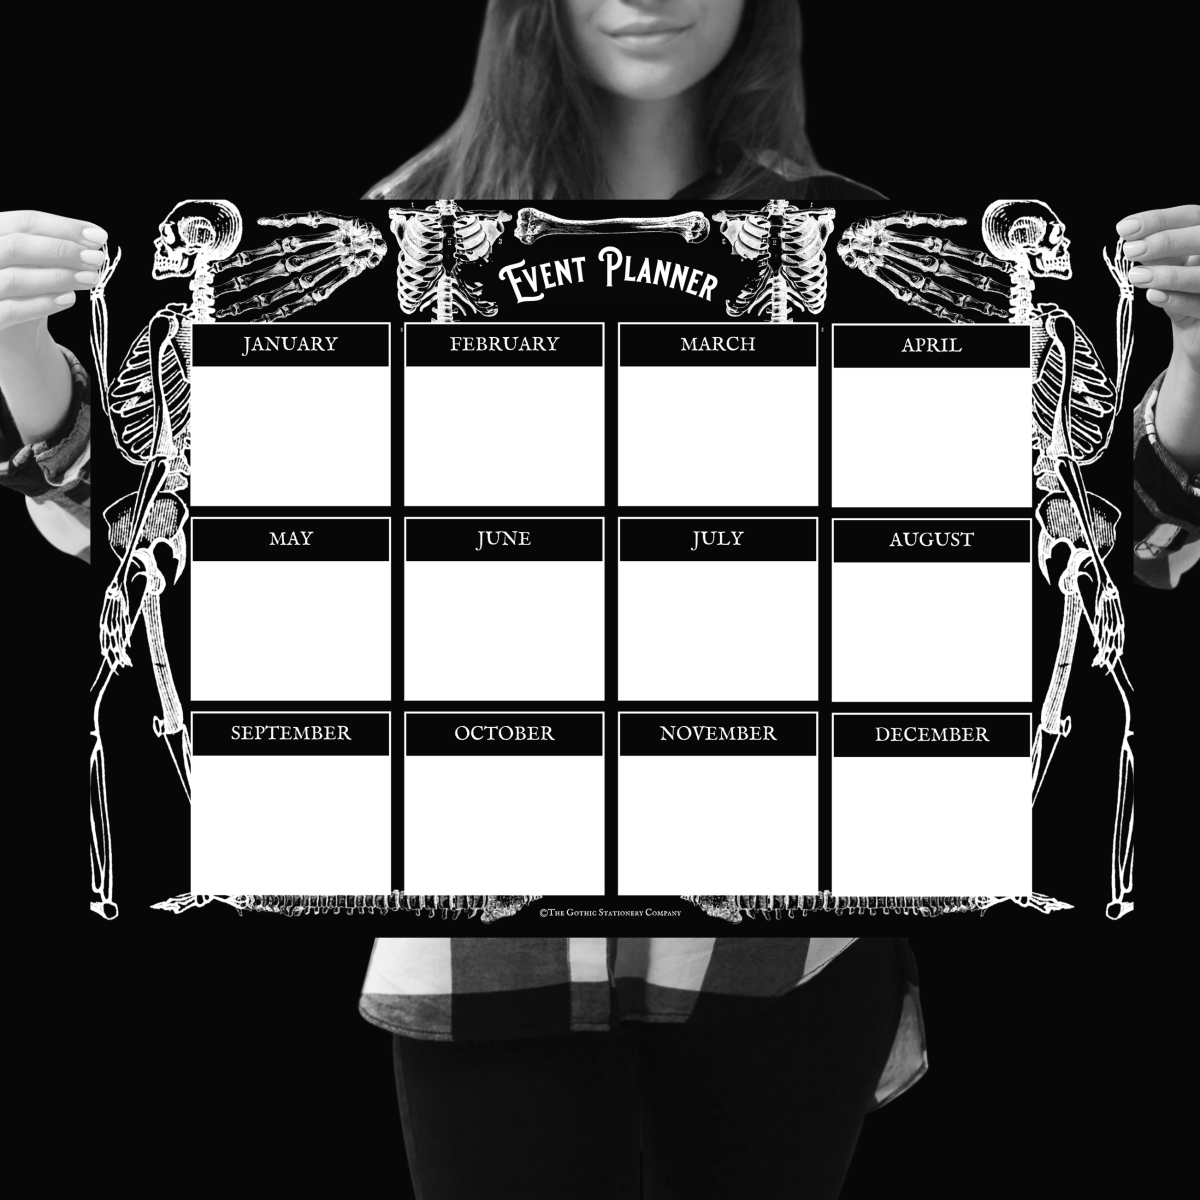 Skeleton Birthday & Anniversary Wall Planner - Event Planner - The Gothic Stationery Company - Wall Planner